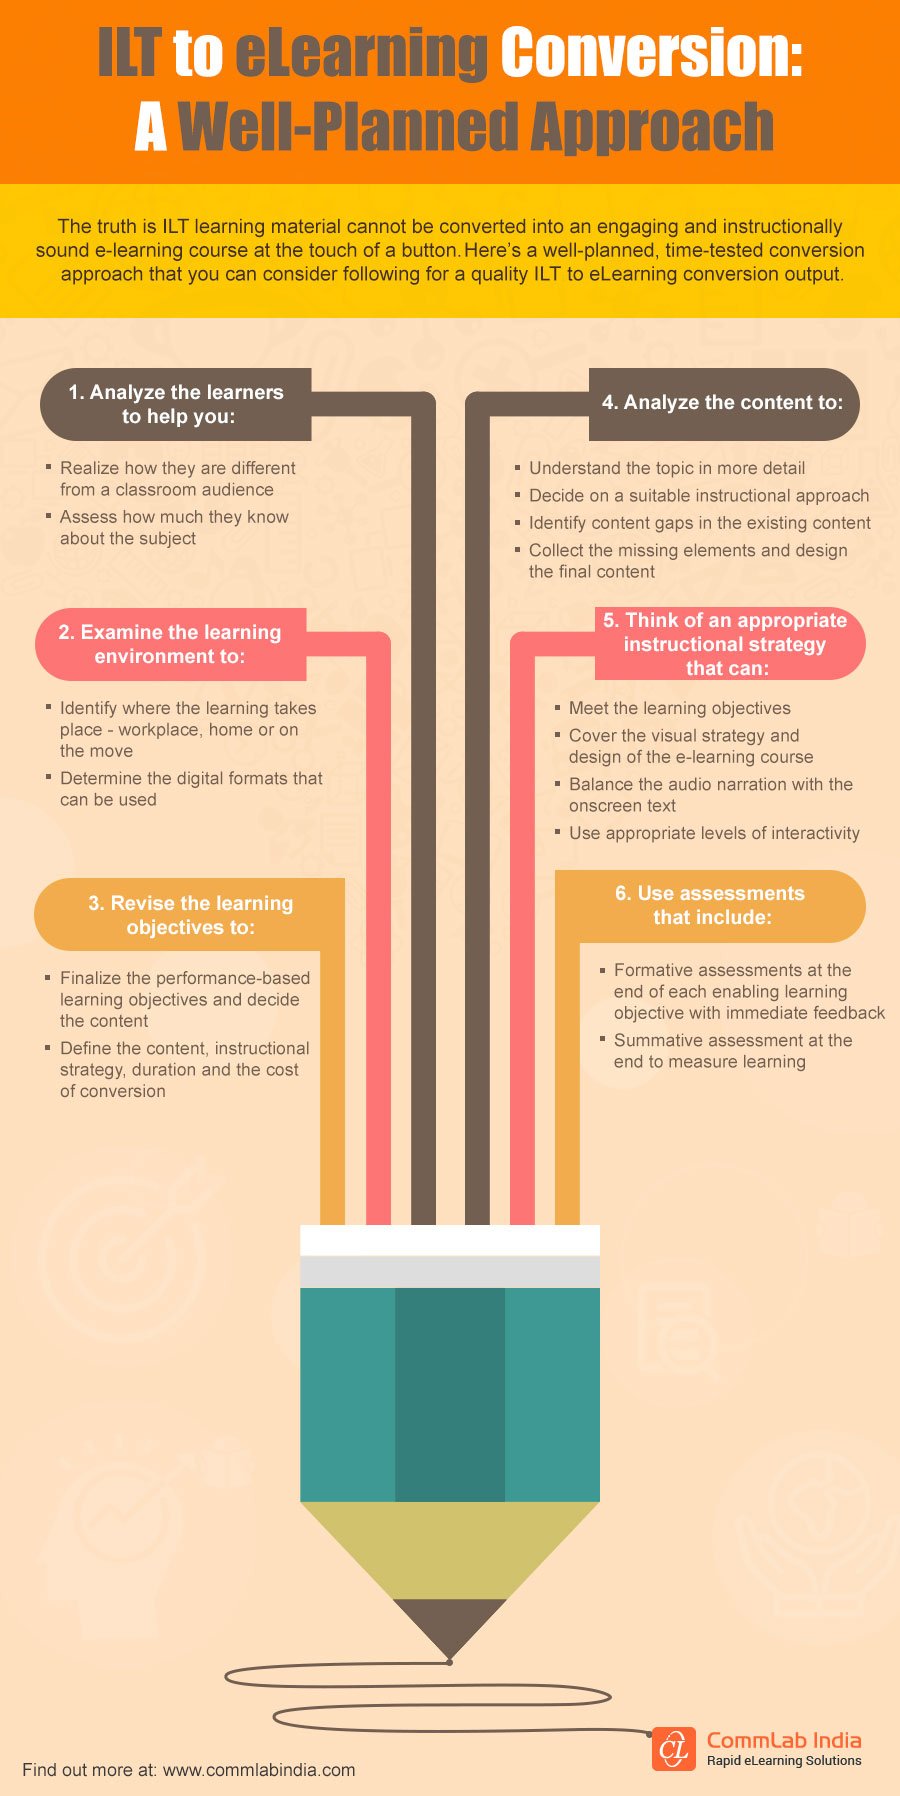 ILT to eLearning Conversion: A Well-Planned Approach [Infographic]